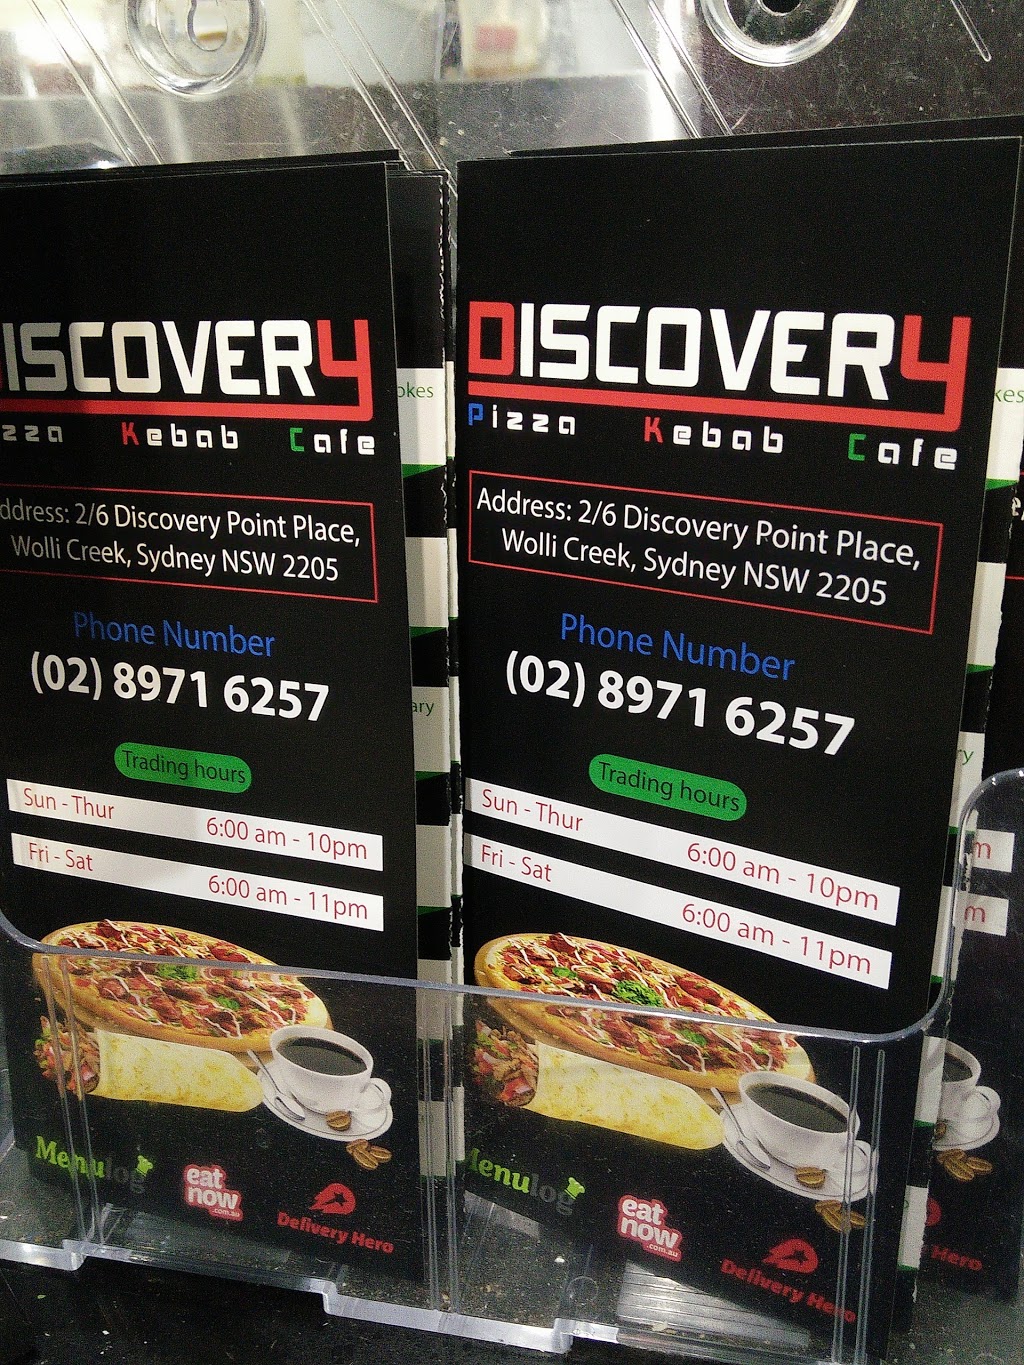 Discovery Pizza Kebab Cafe | restaurant | 2/6 Discovery Point Place, Wolli Creek NSW 2205, Australia | 0289716257 OR +61 2 8971 6257